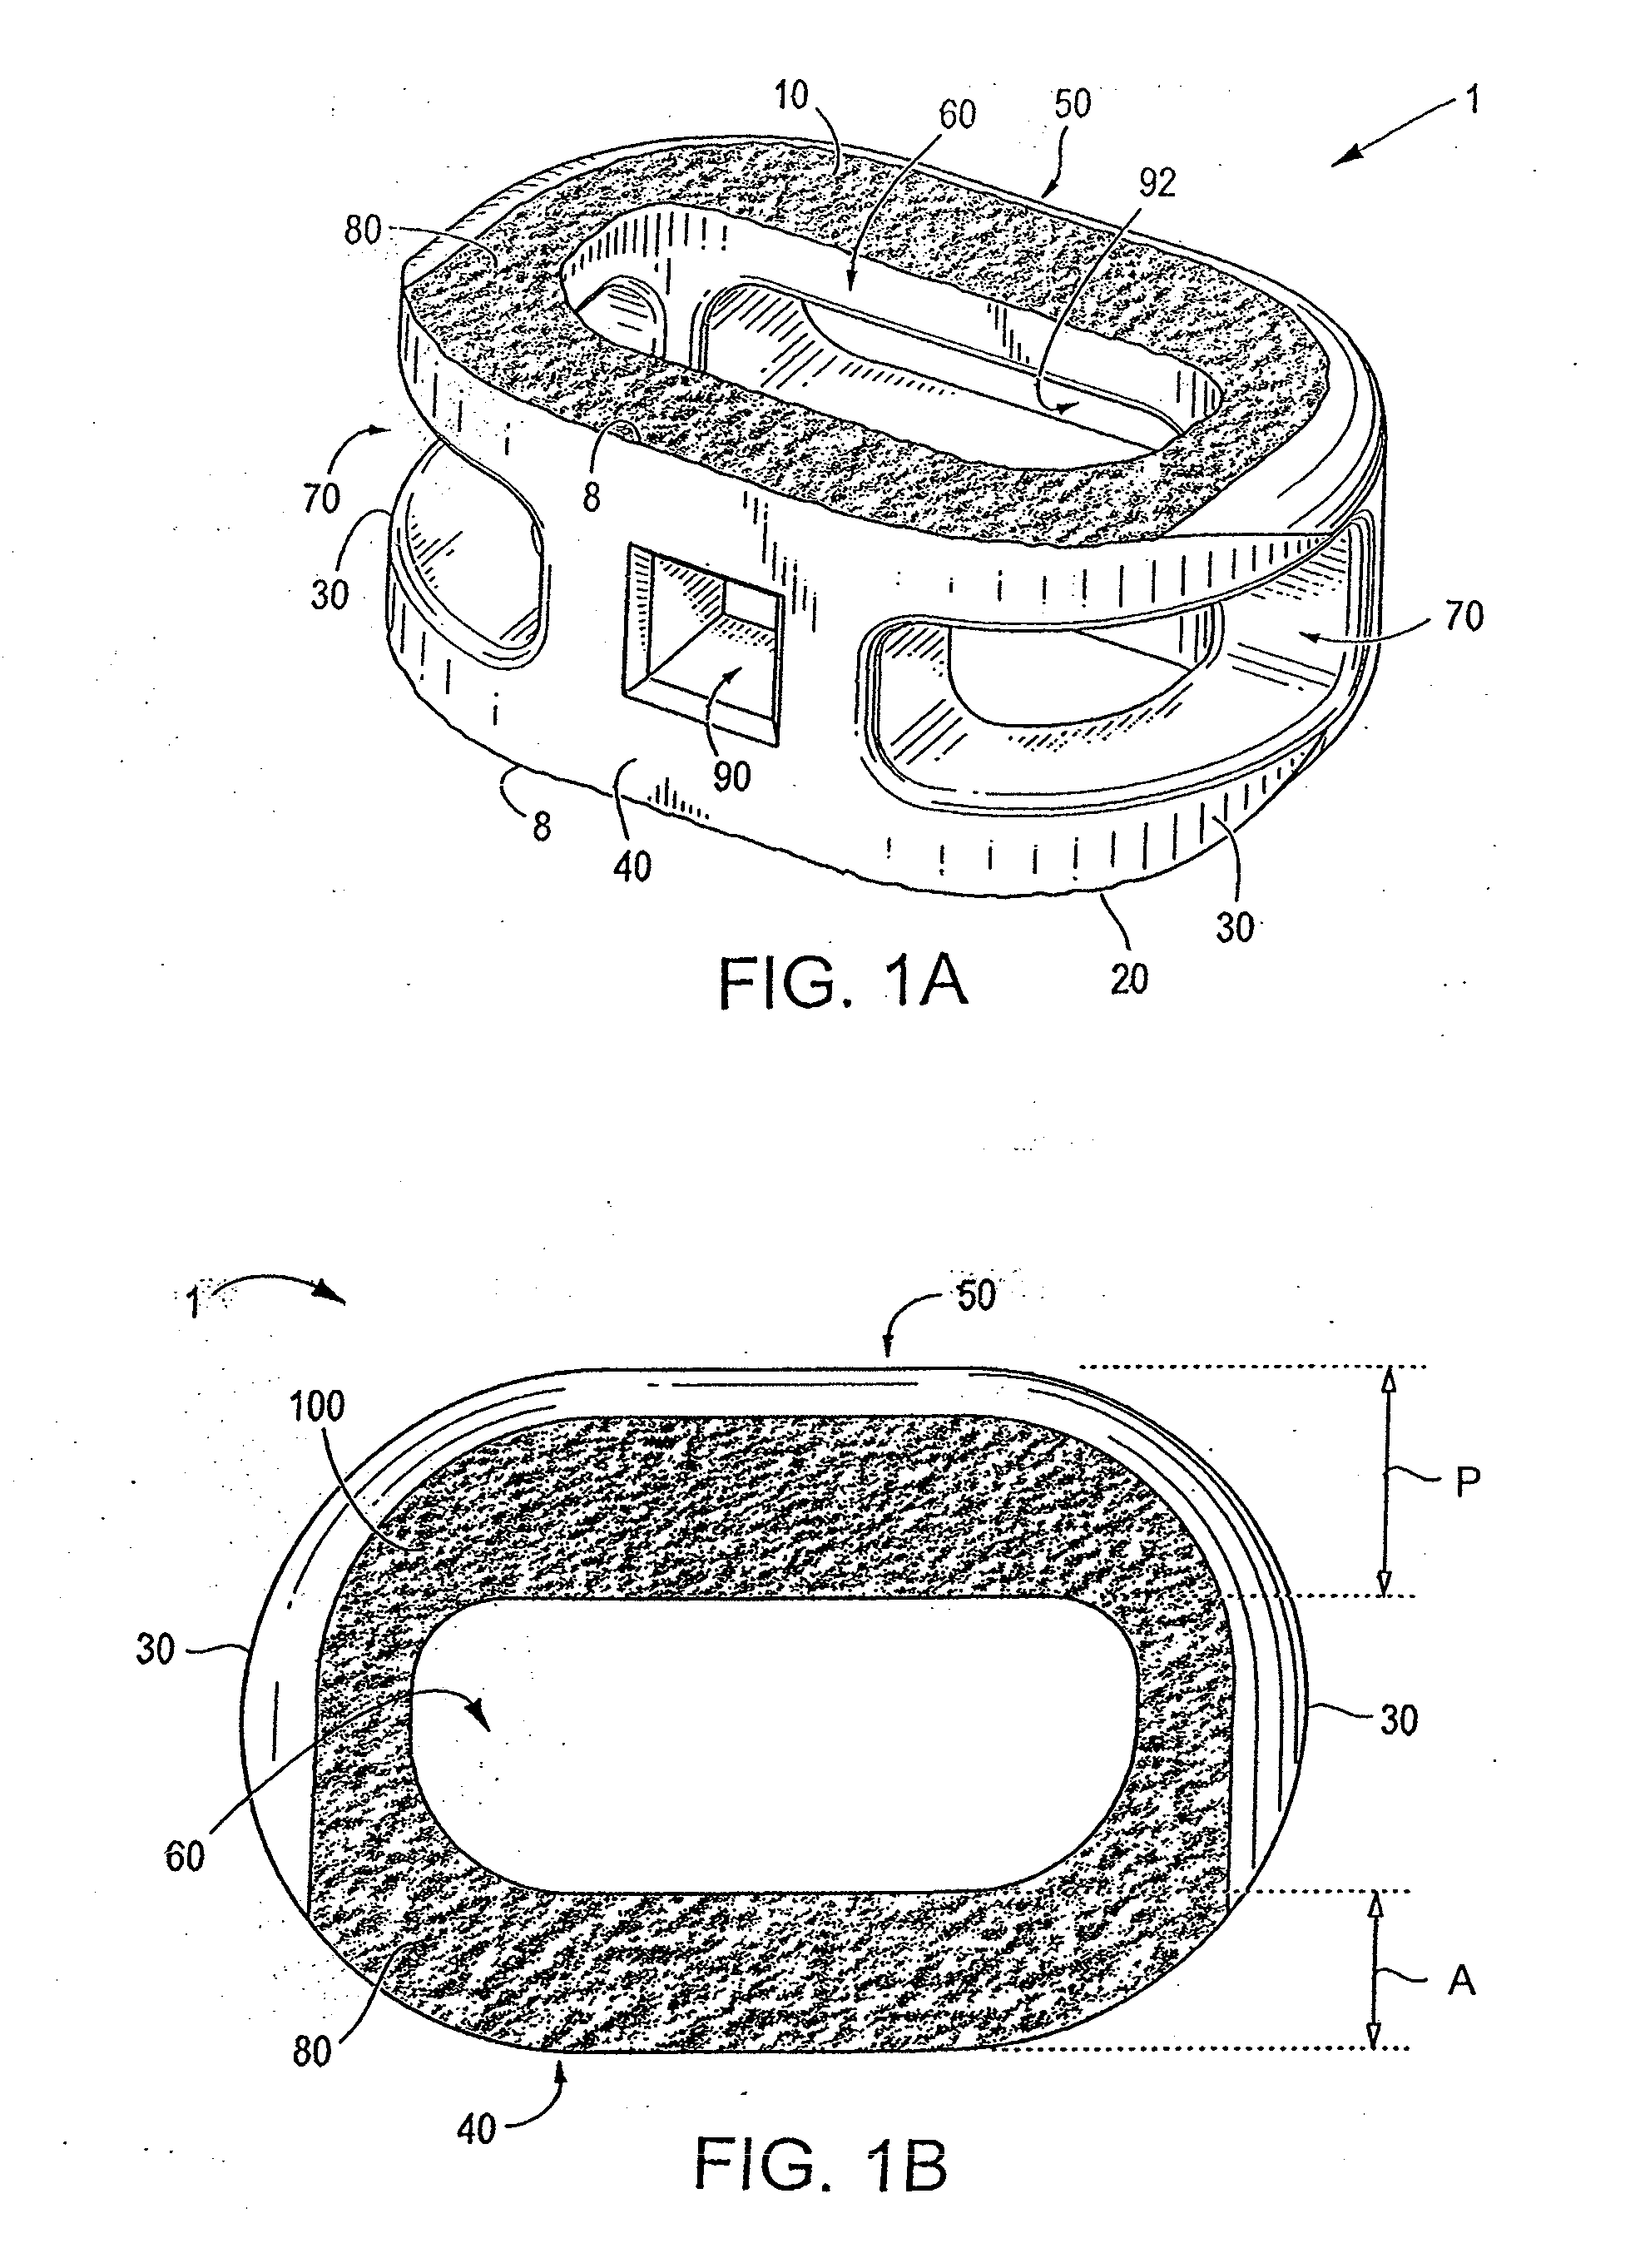 Spinal implant having variable ratios of the integration surface area to the axial passage area